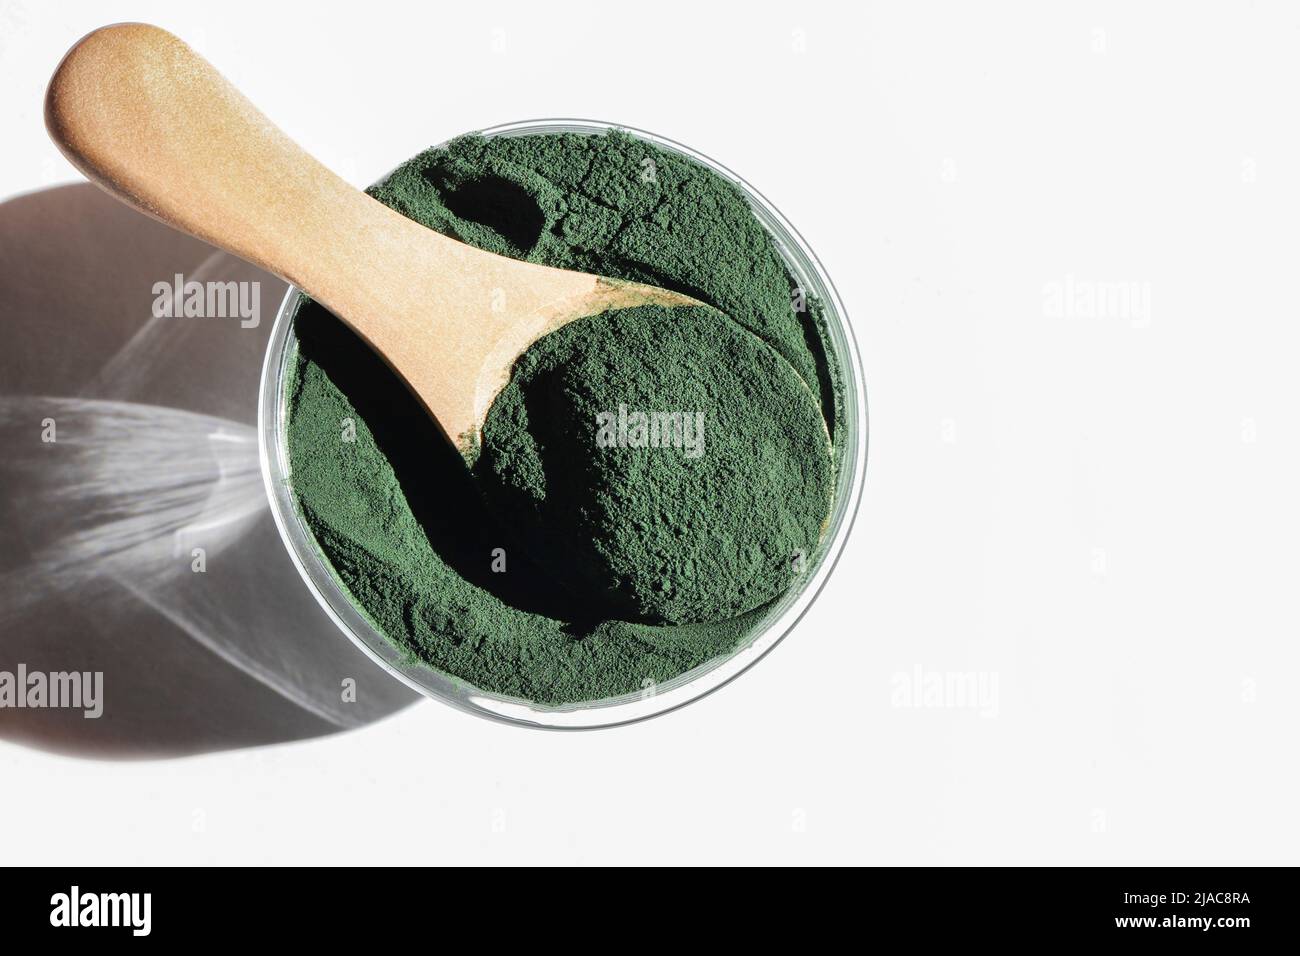 natural additives and superfood. green spirulina algae powder in glass with wood spoon on white background. healthy lifestyle concept. organic food  Stock Photo